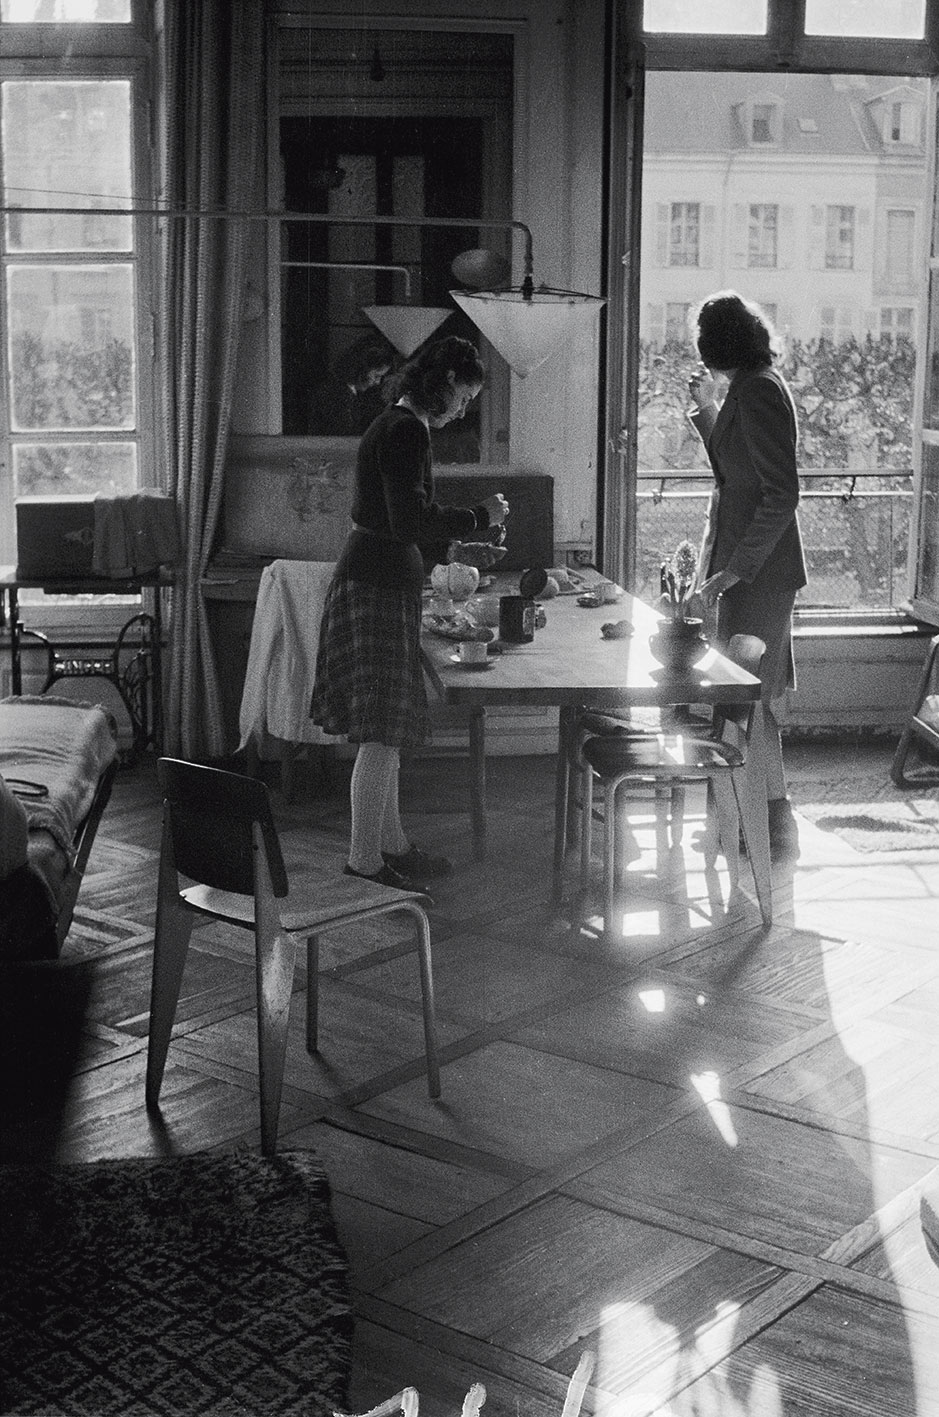 The Prouvé family’s apartment, Place de la Carrière, Nancy, c. 1943. The dining area with chairs no. 4 and a lift-up table.